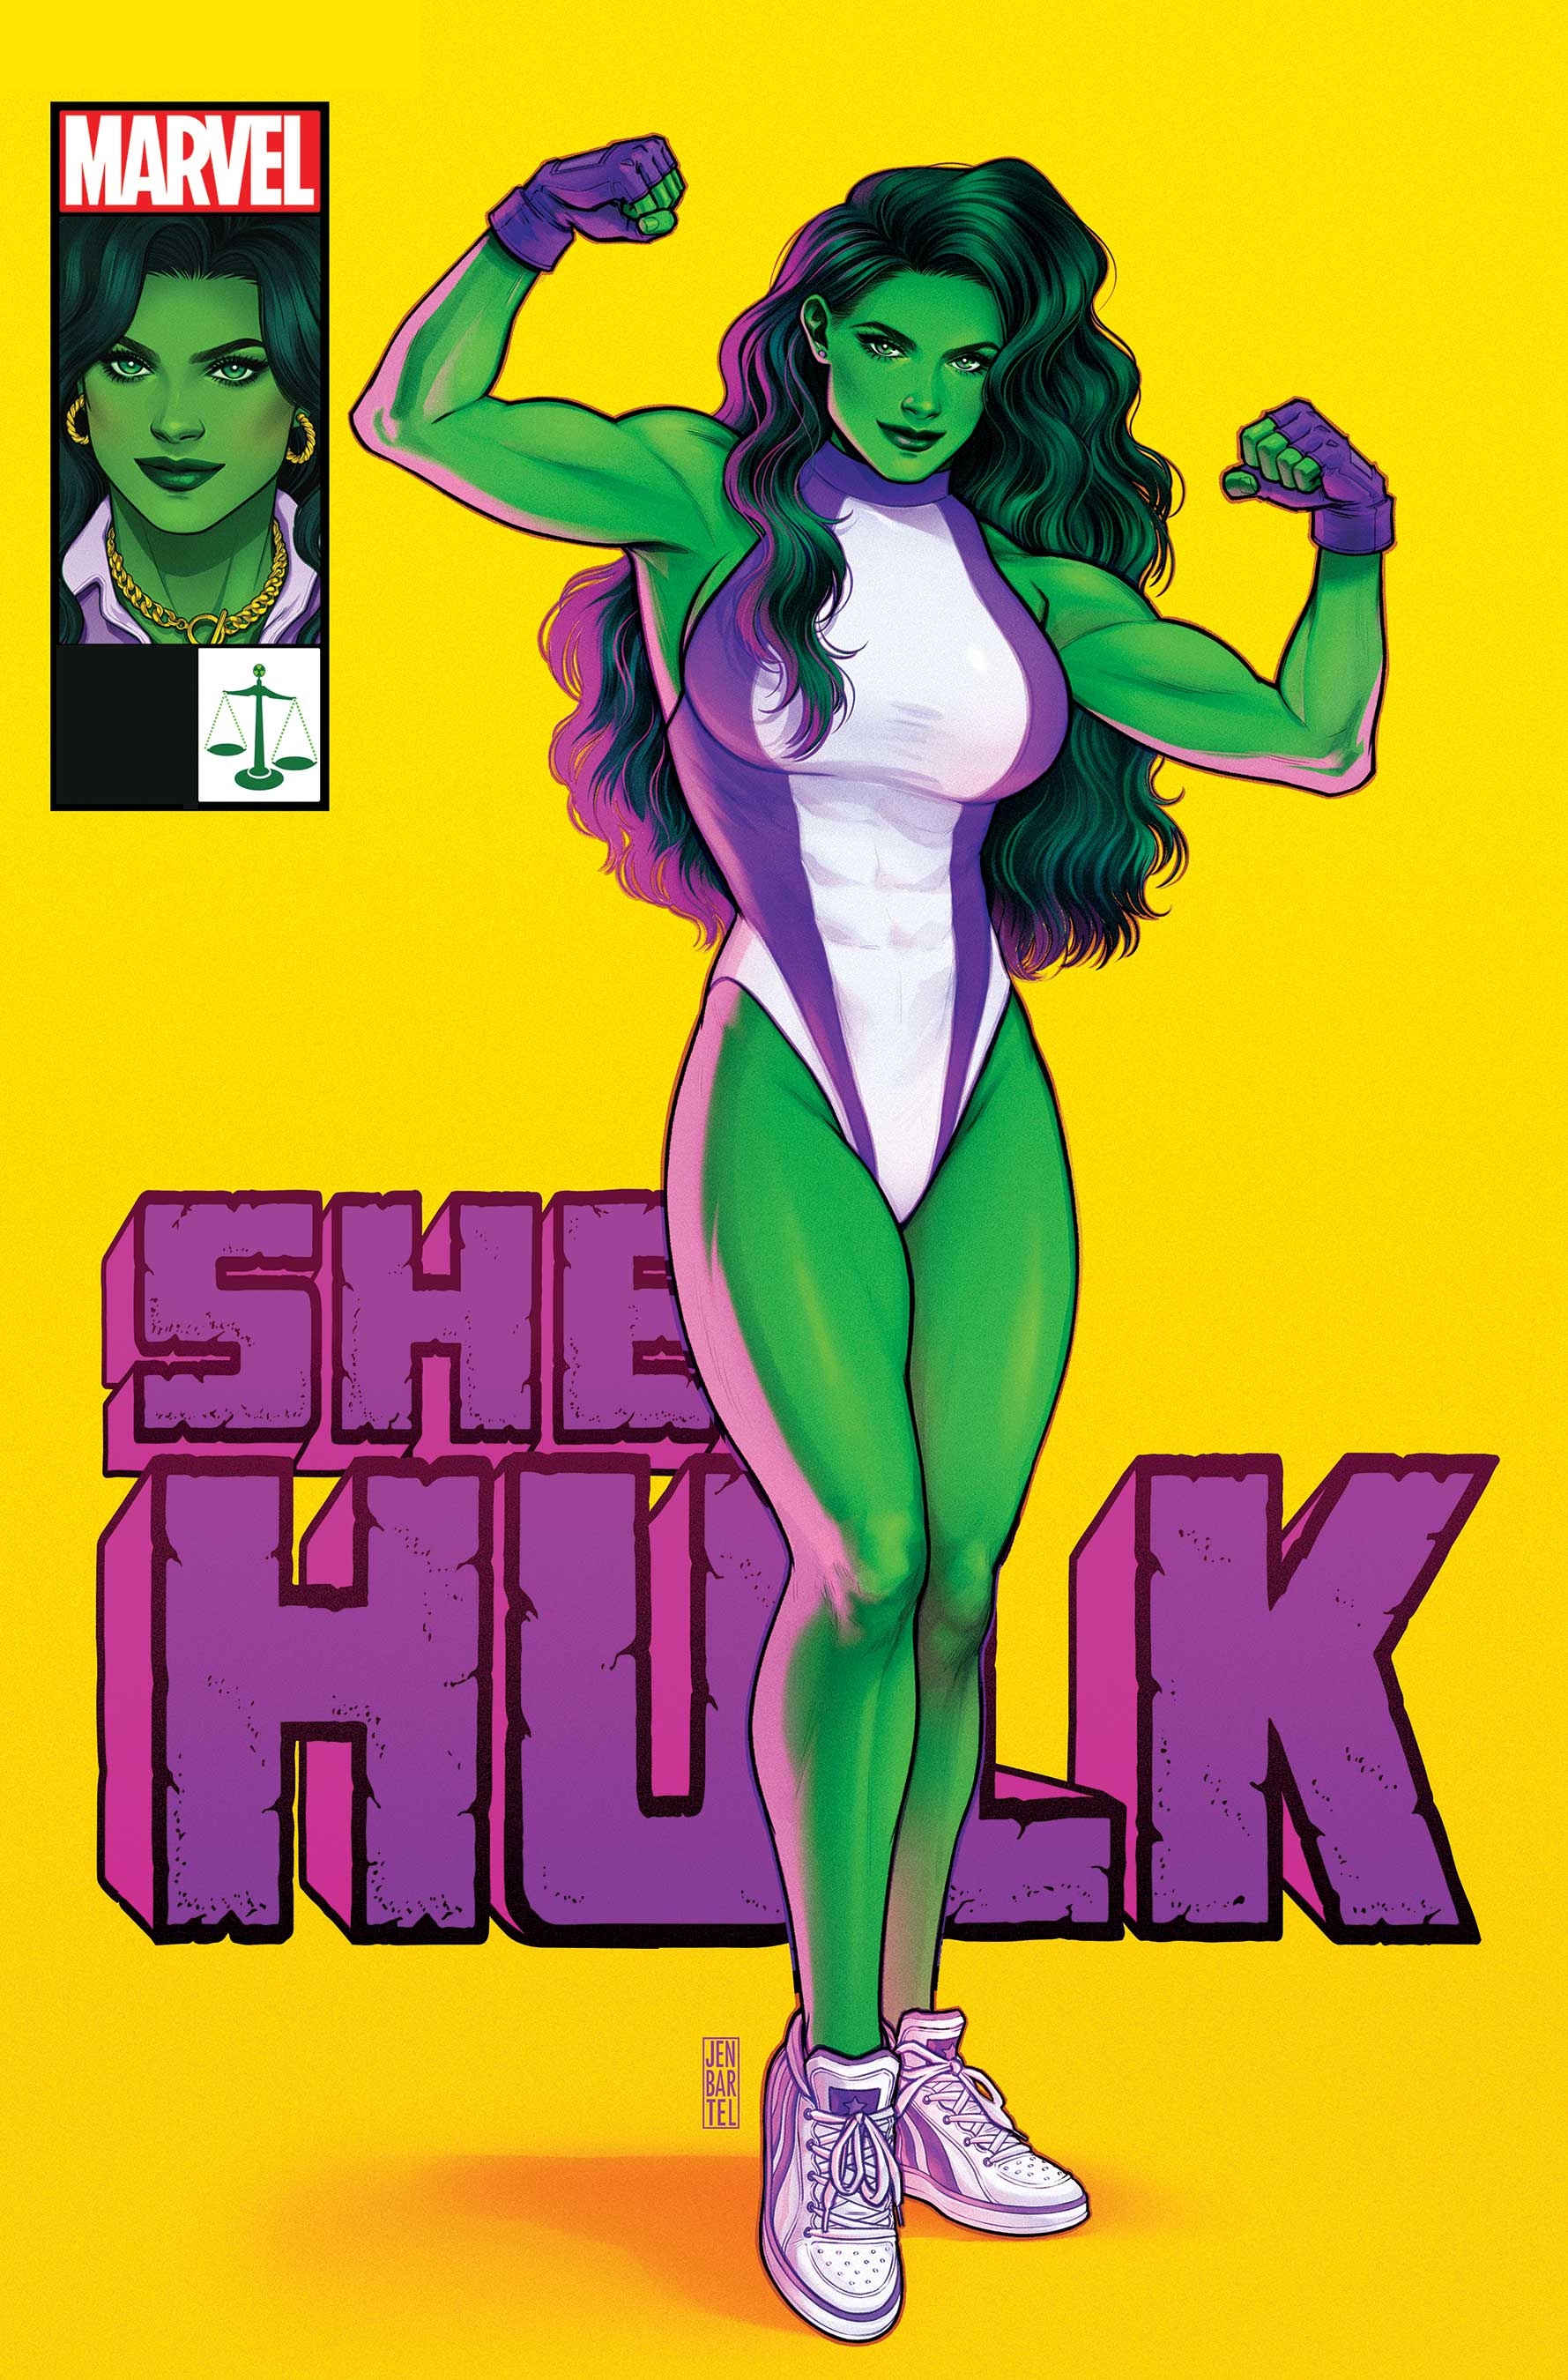 She-Hulk: Attorney at Law (TV Series 2022): The cousin of Bruce Banner, Marvel Cinematic Universe, Disney+ series, Runaways Writer. 1780x2700 HD Wallpaper.